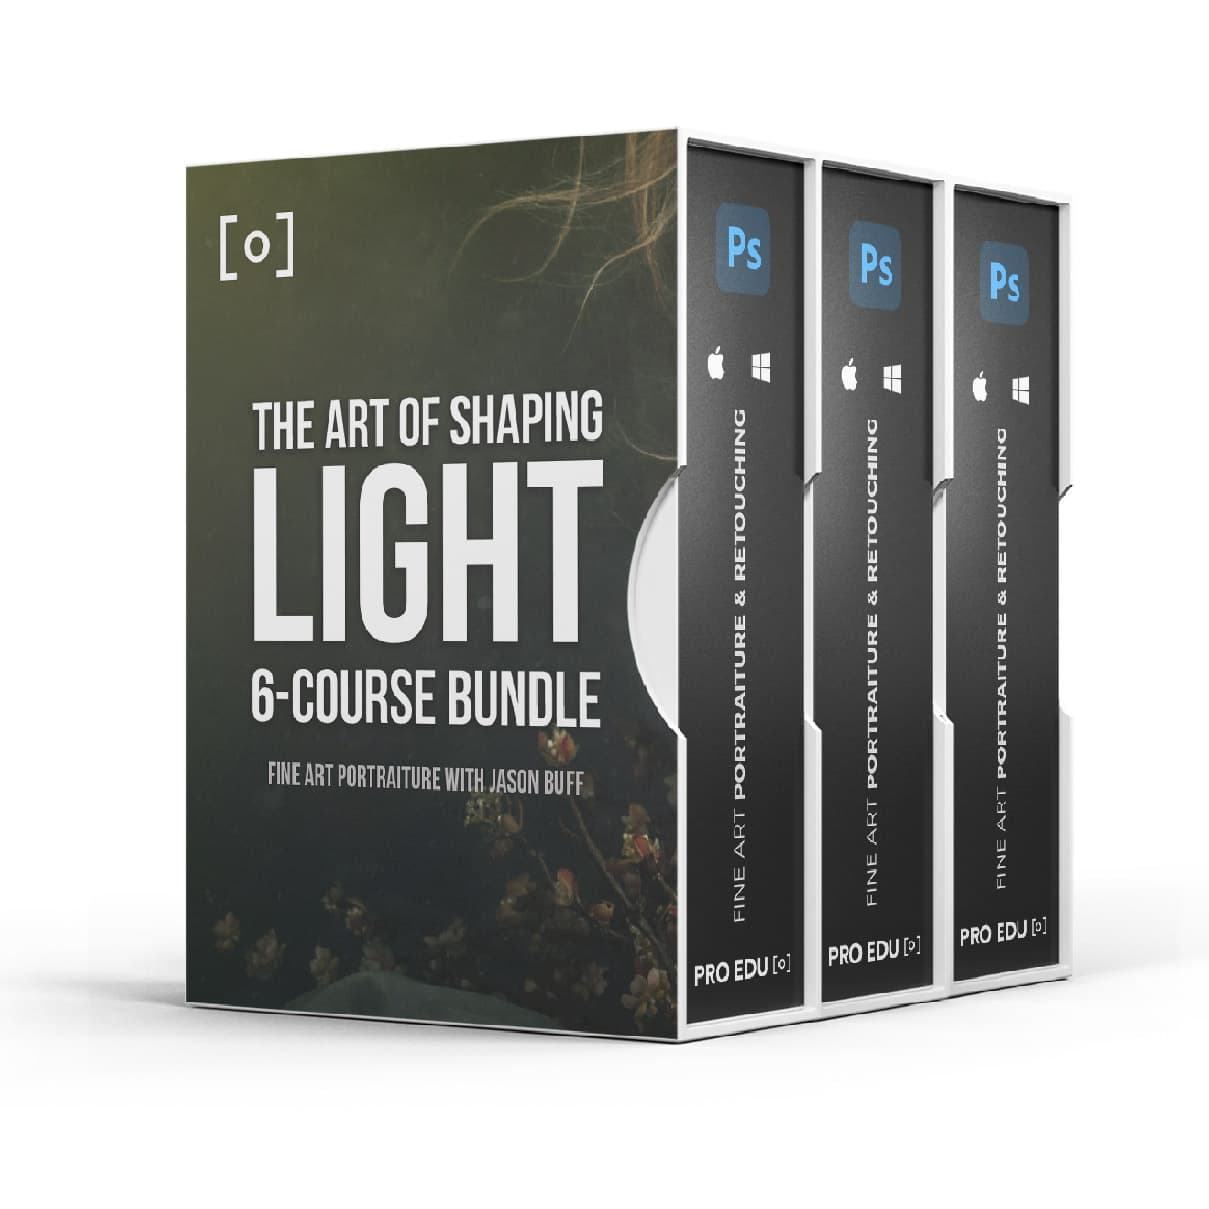 The art of shaping light 6 course series